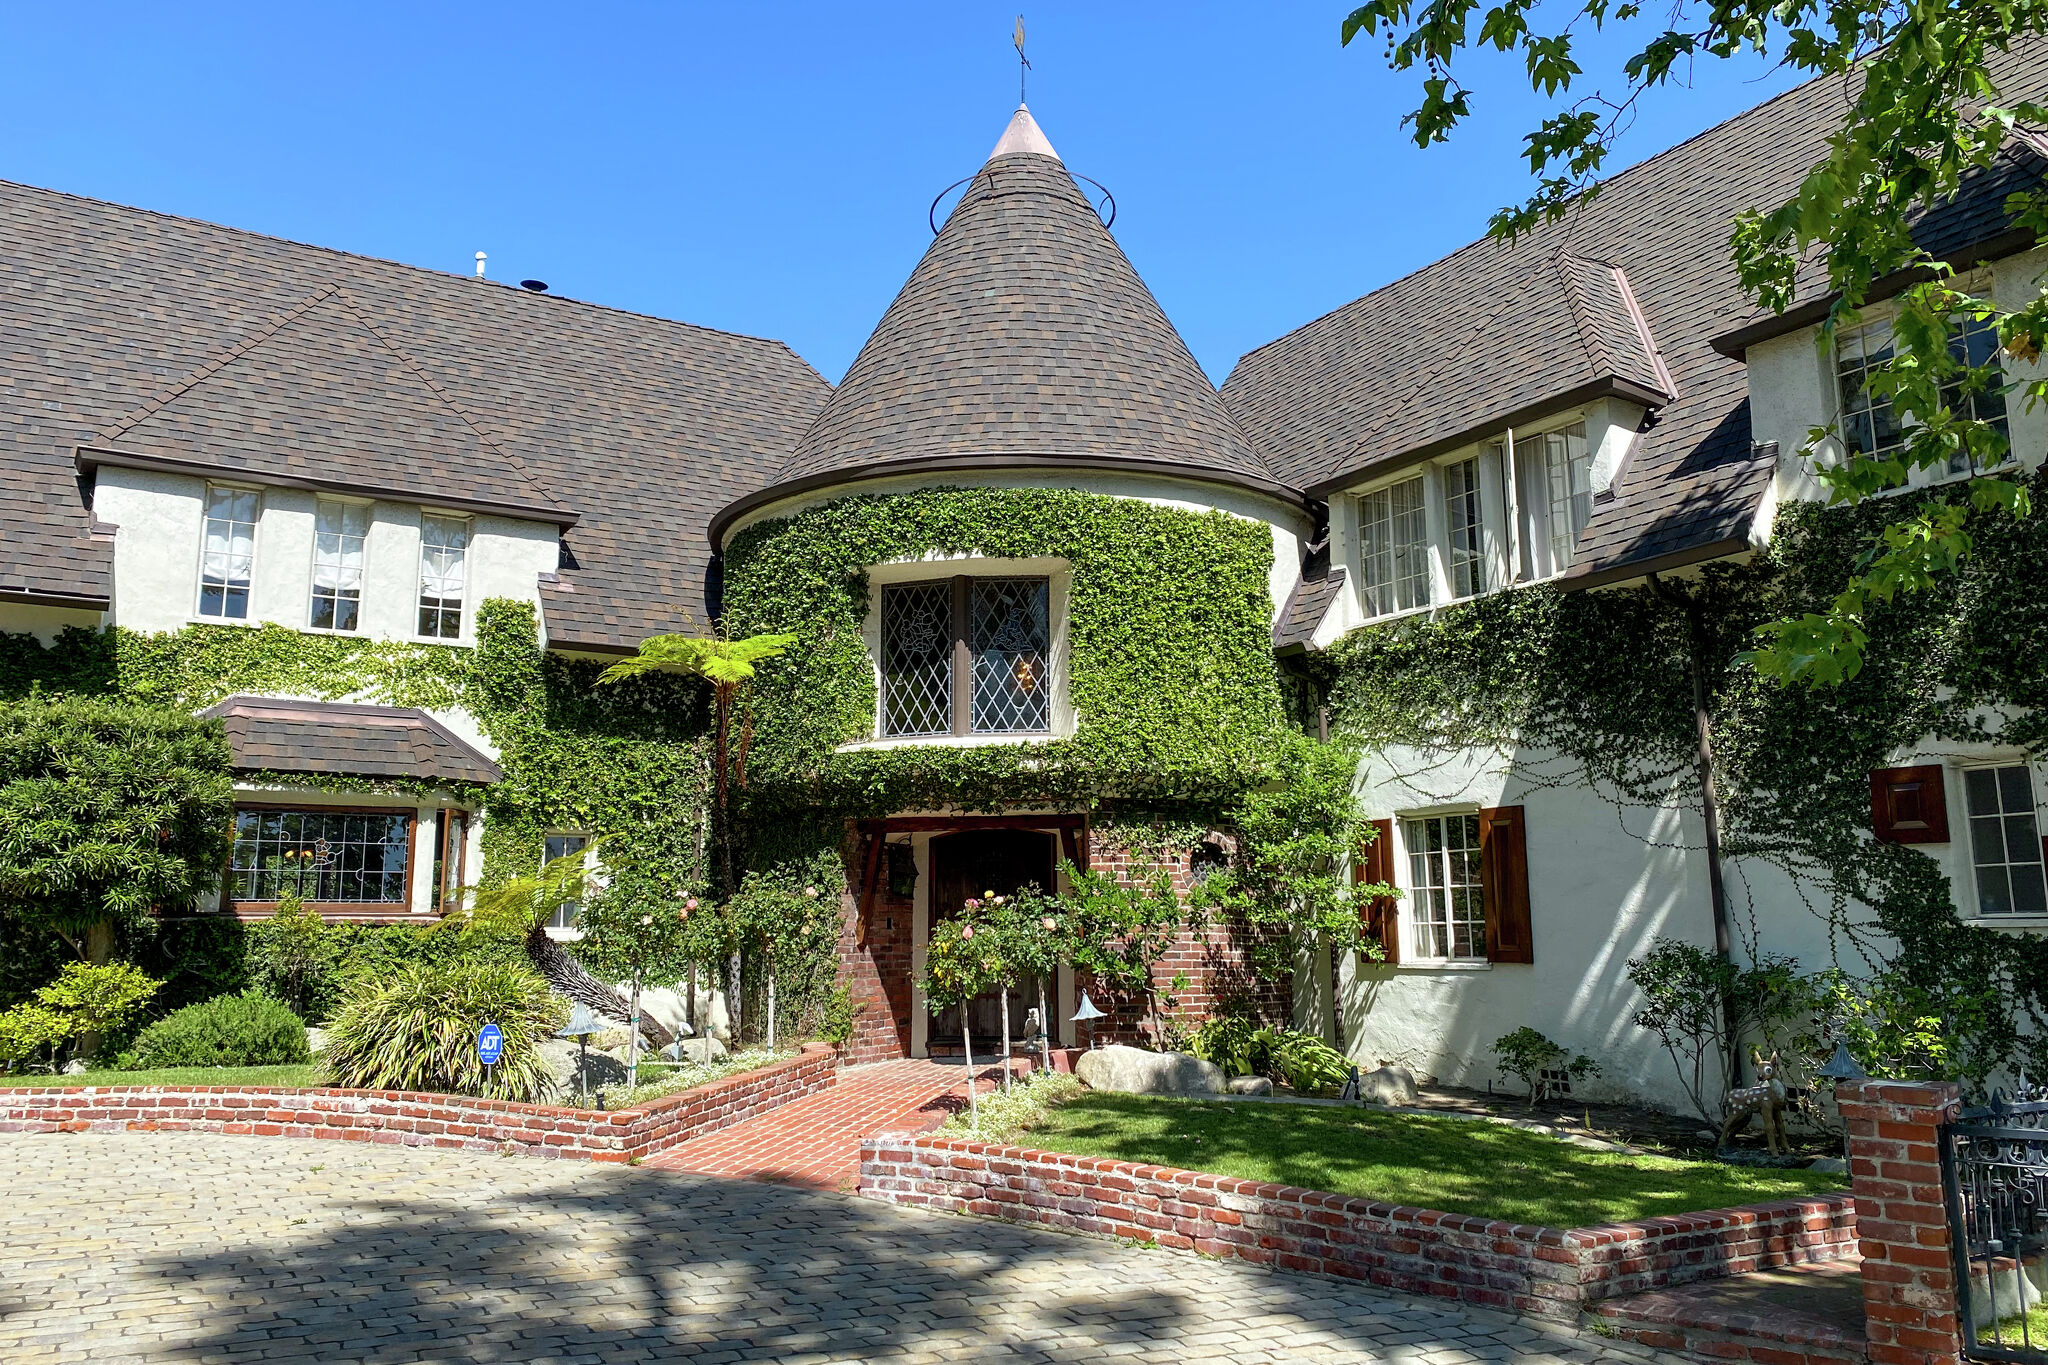 Take a closer look at the Hollywood homes of Walt Disney